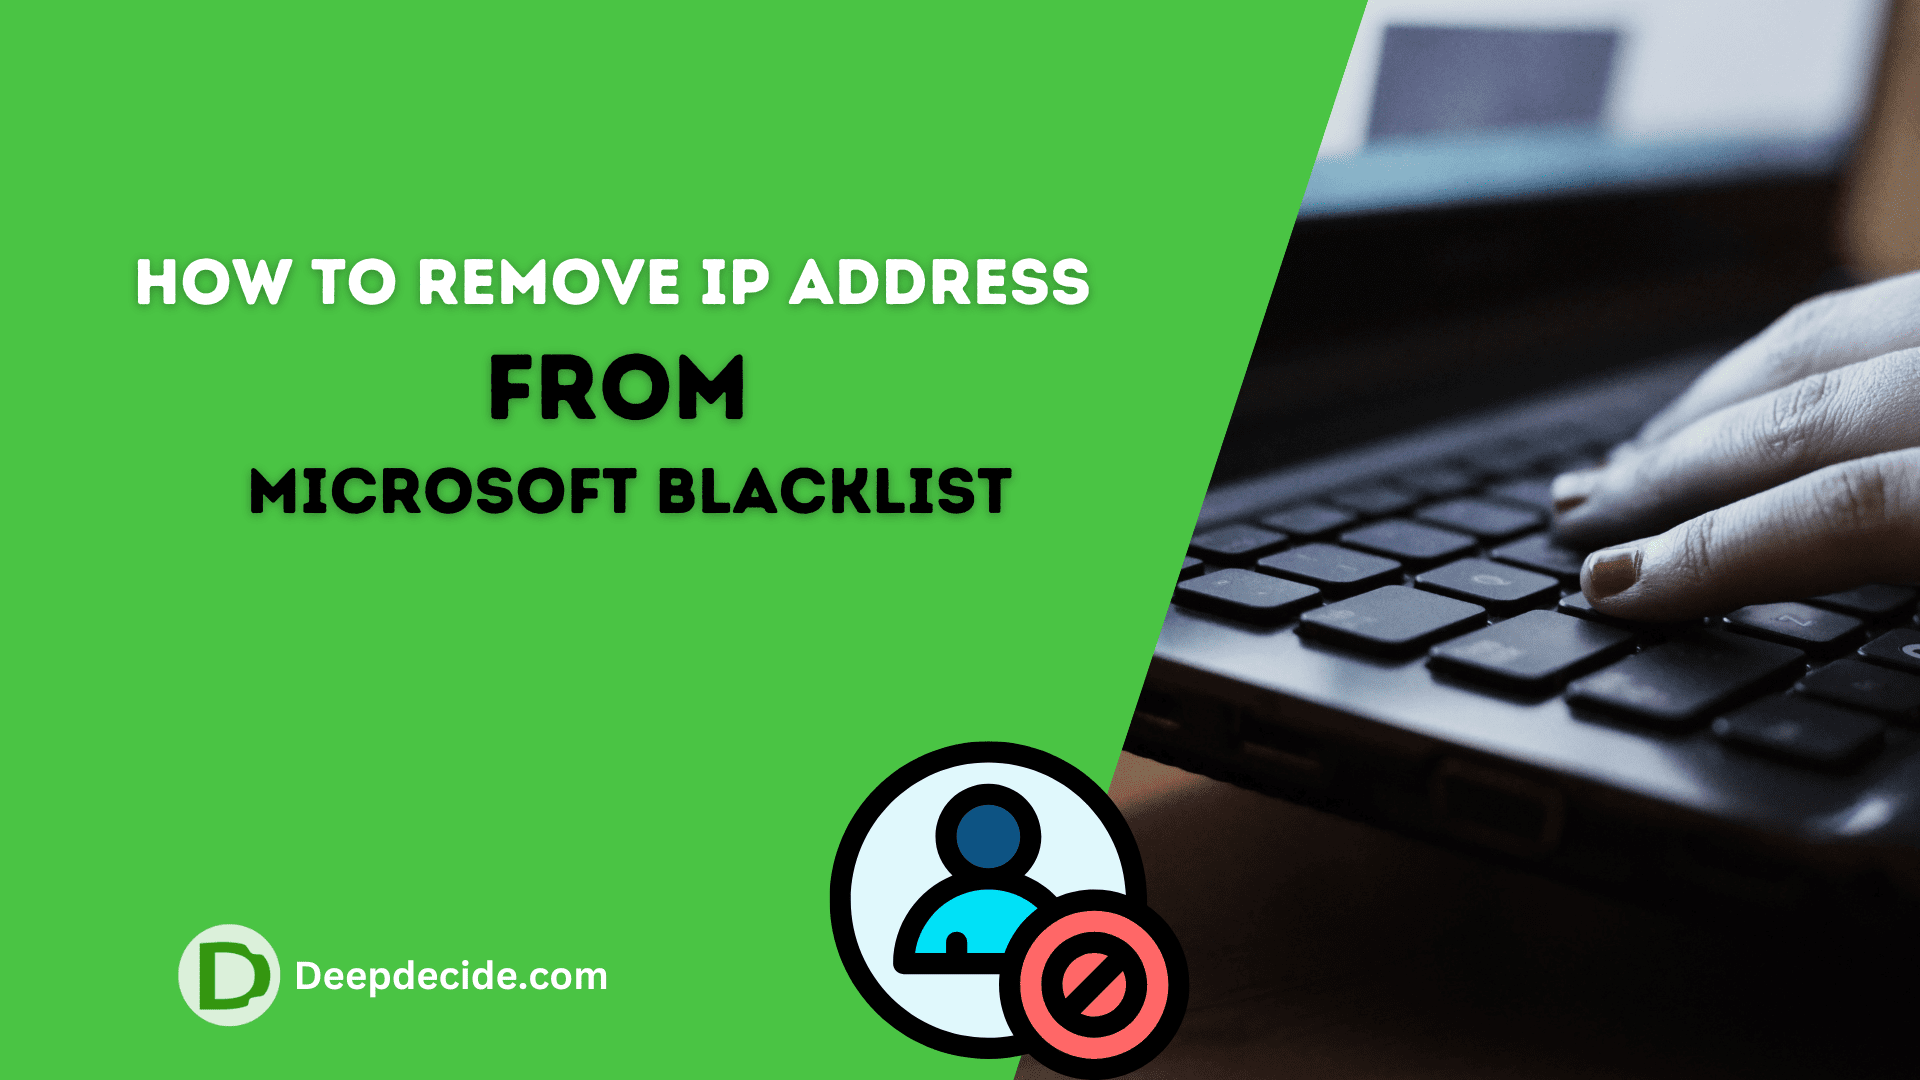 How to Remove IP Address from Microsoft Blacklist